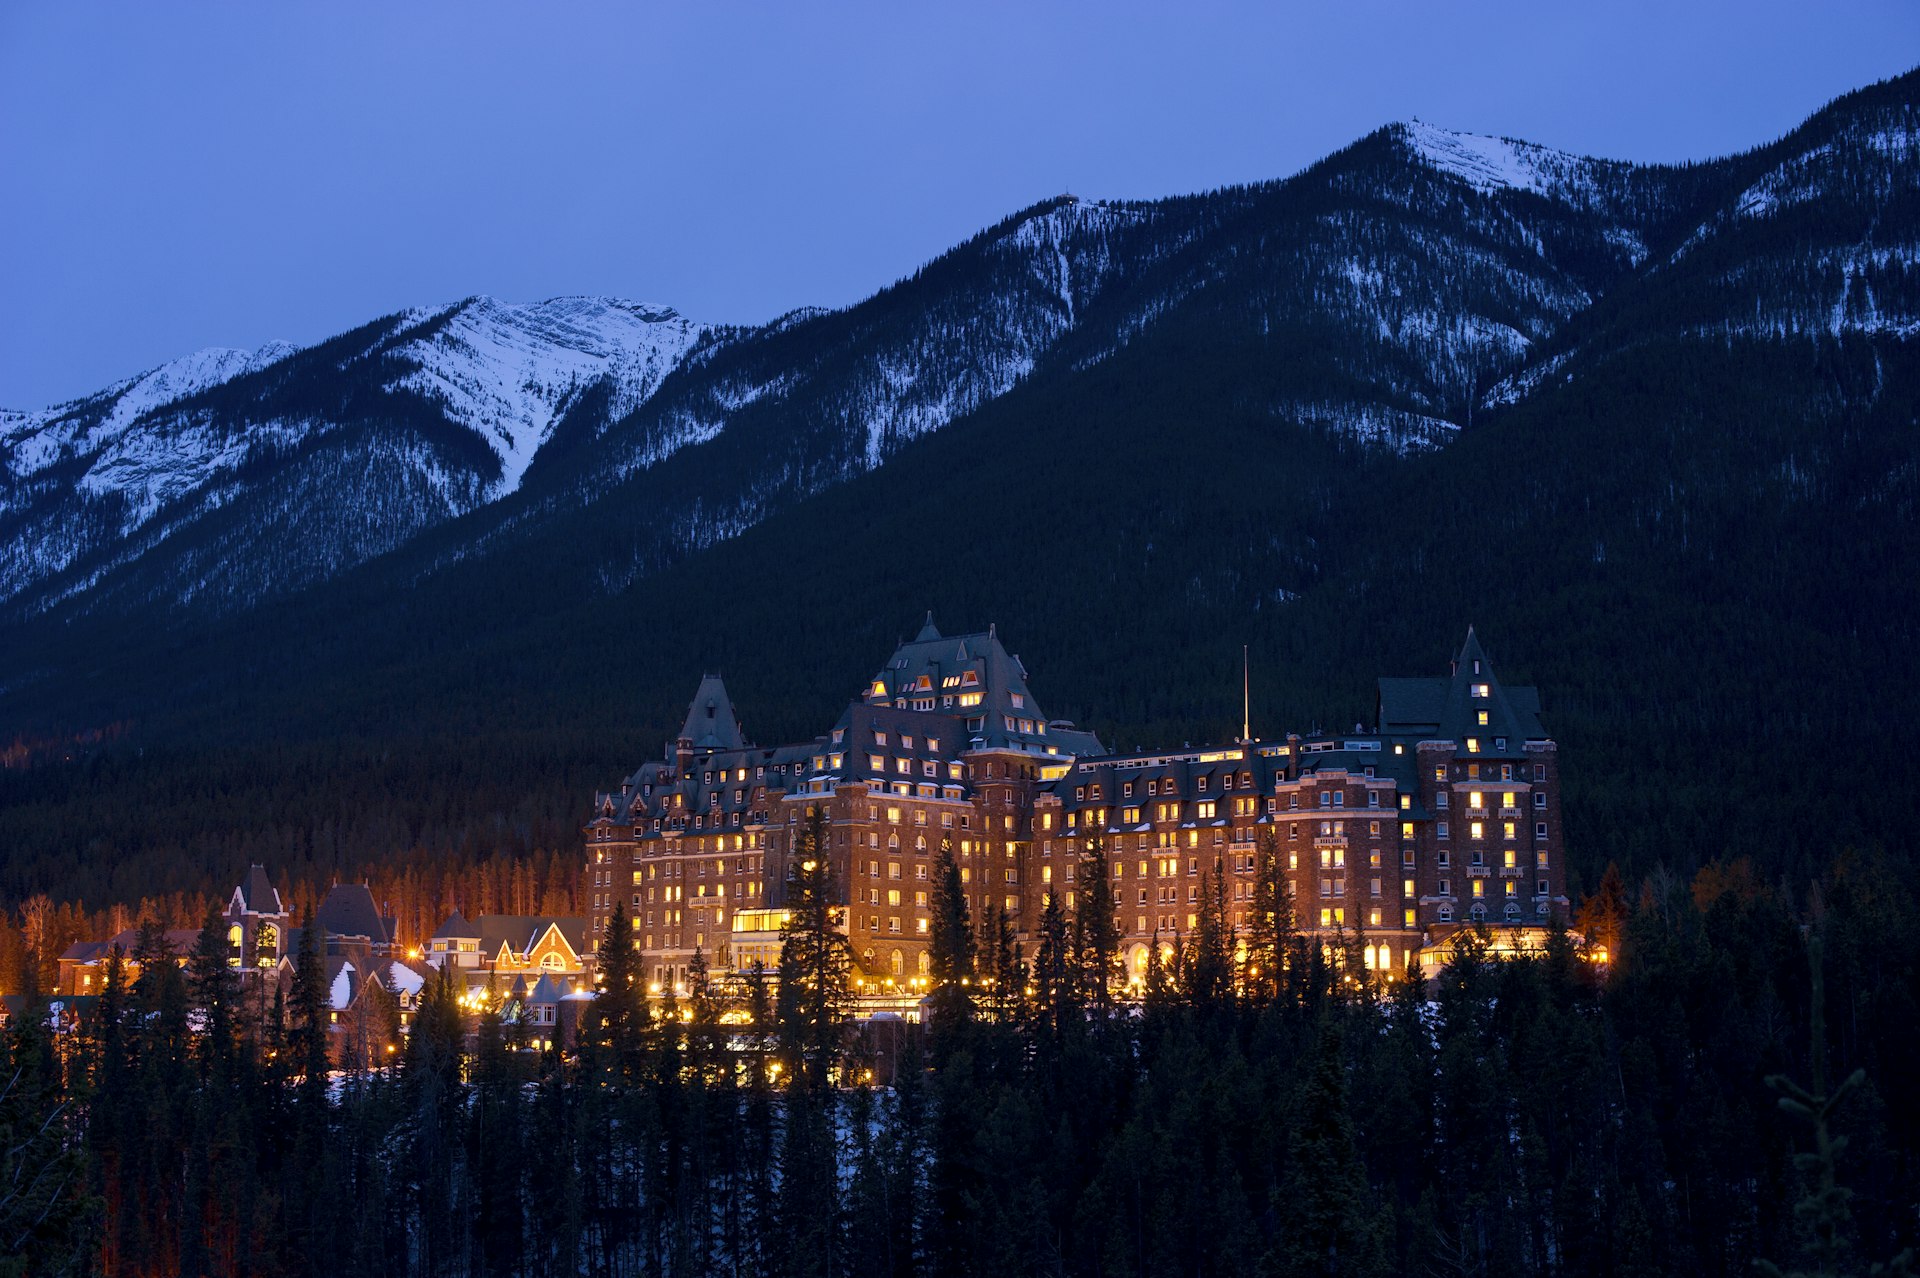 The famous Banff Springs Hotel is a luxury hotel that was built during the nineteenth century as one of Canada's grand railway hotels, being constructed in Scottish Baronial style and located in Banff National Park, Alberta, Canada.